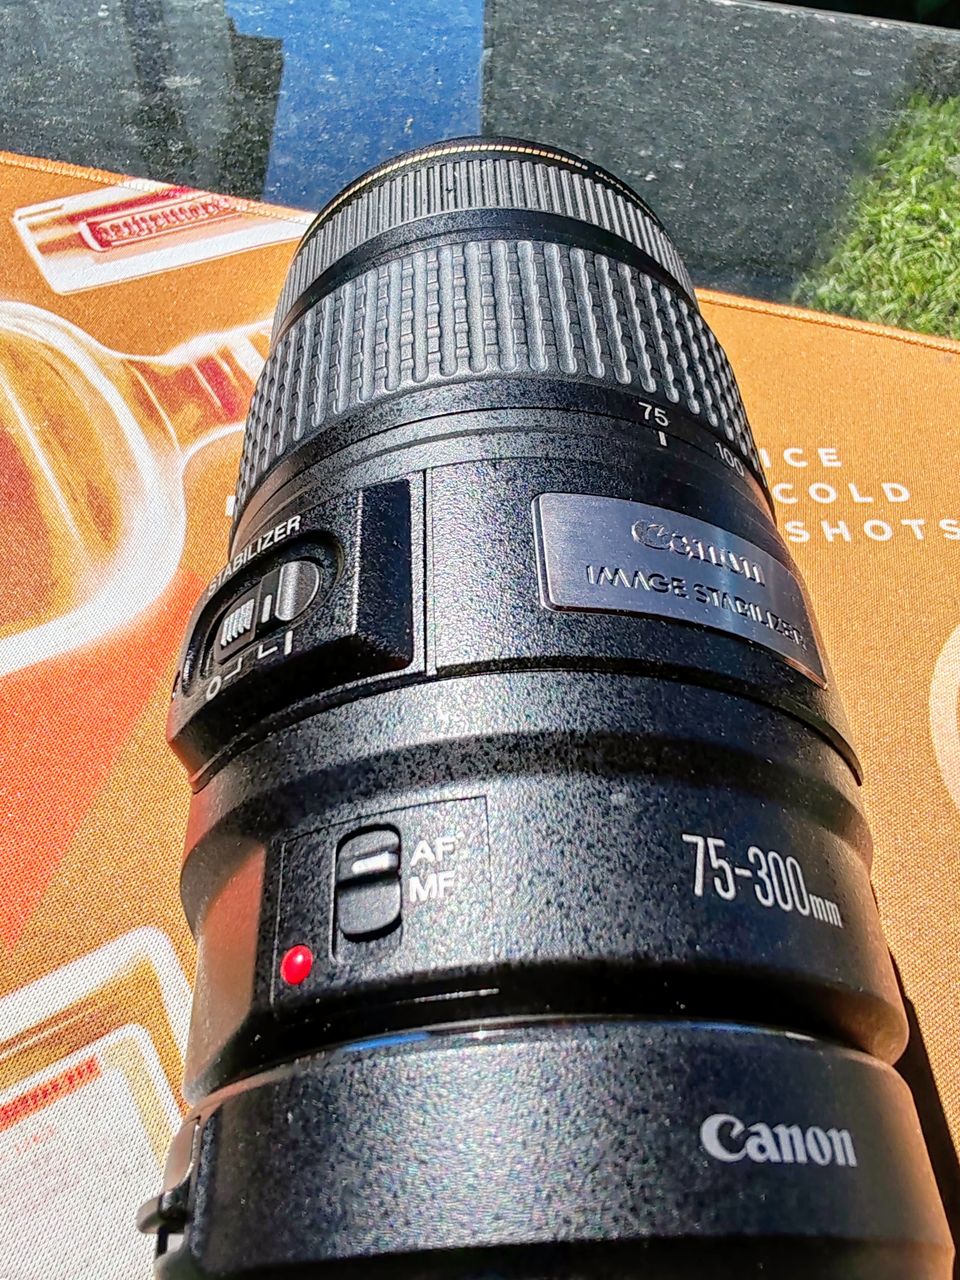 Canon 75-300mm IS